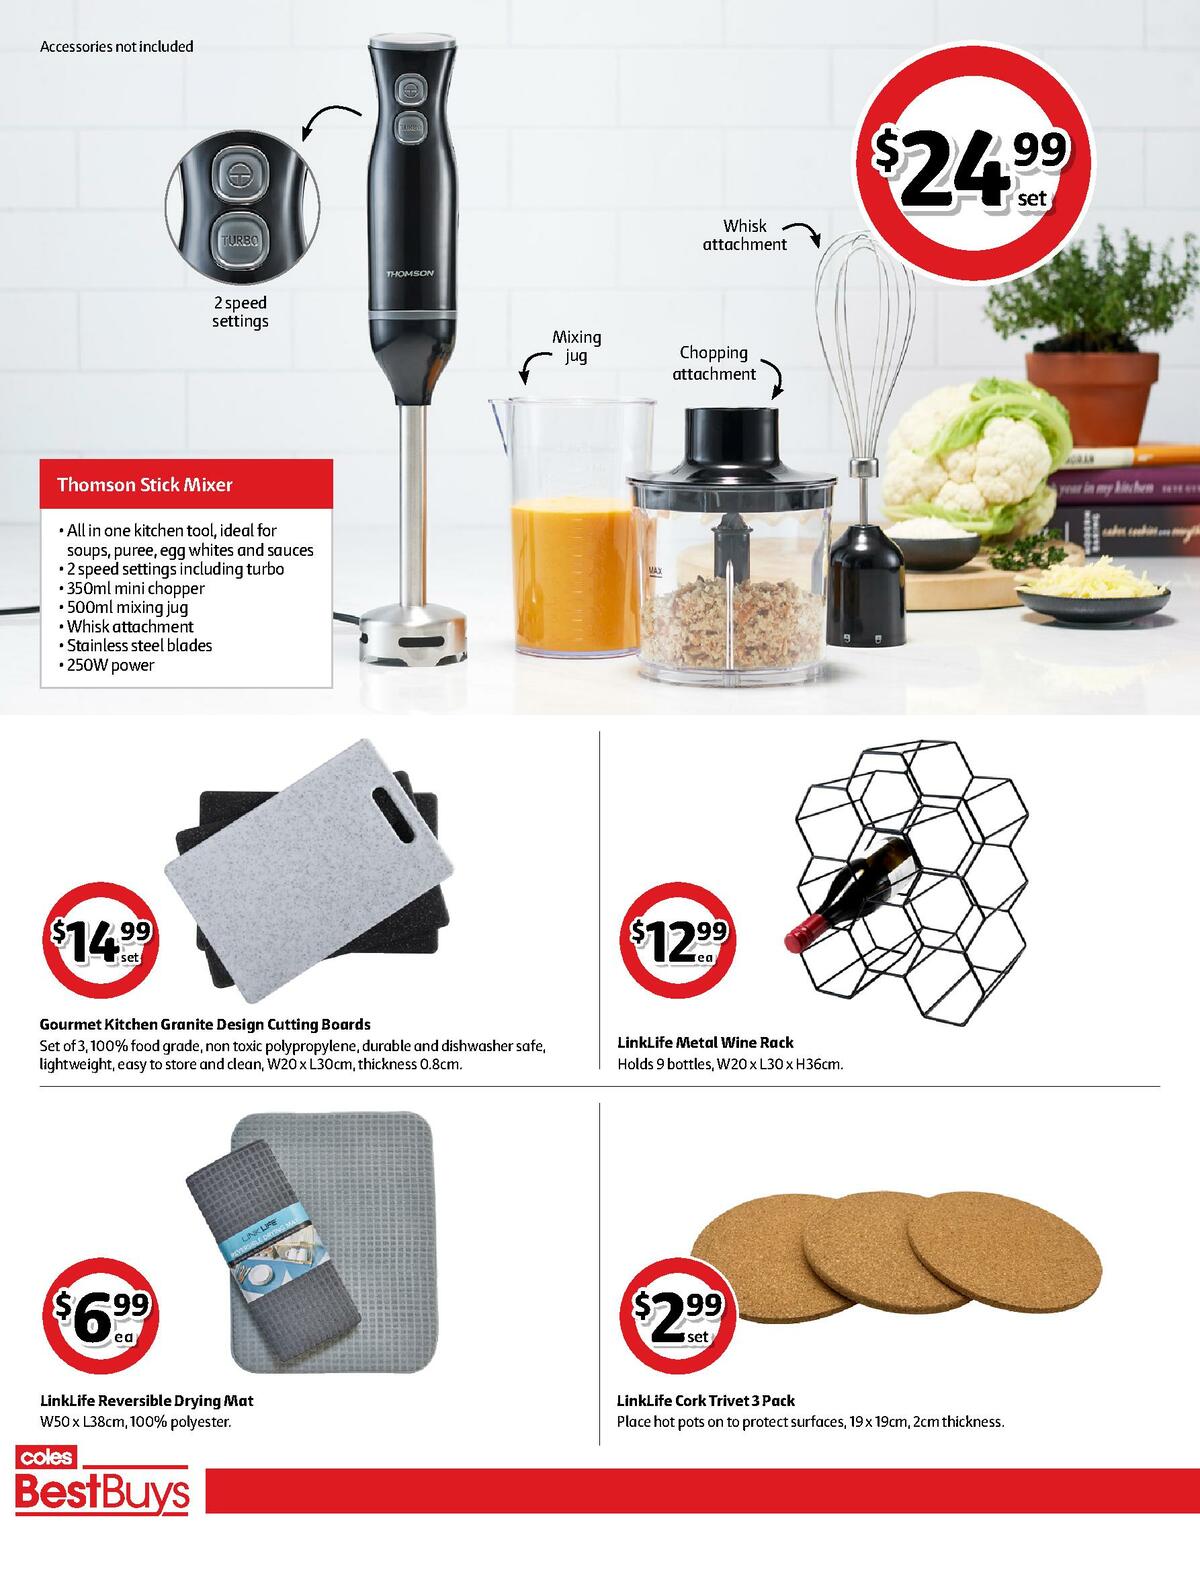 Coles Best Buys - Winter Appliances Catalogues from 4 June